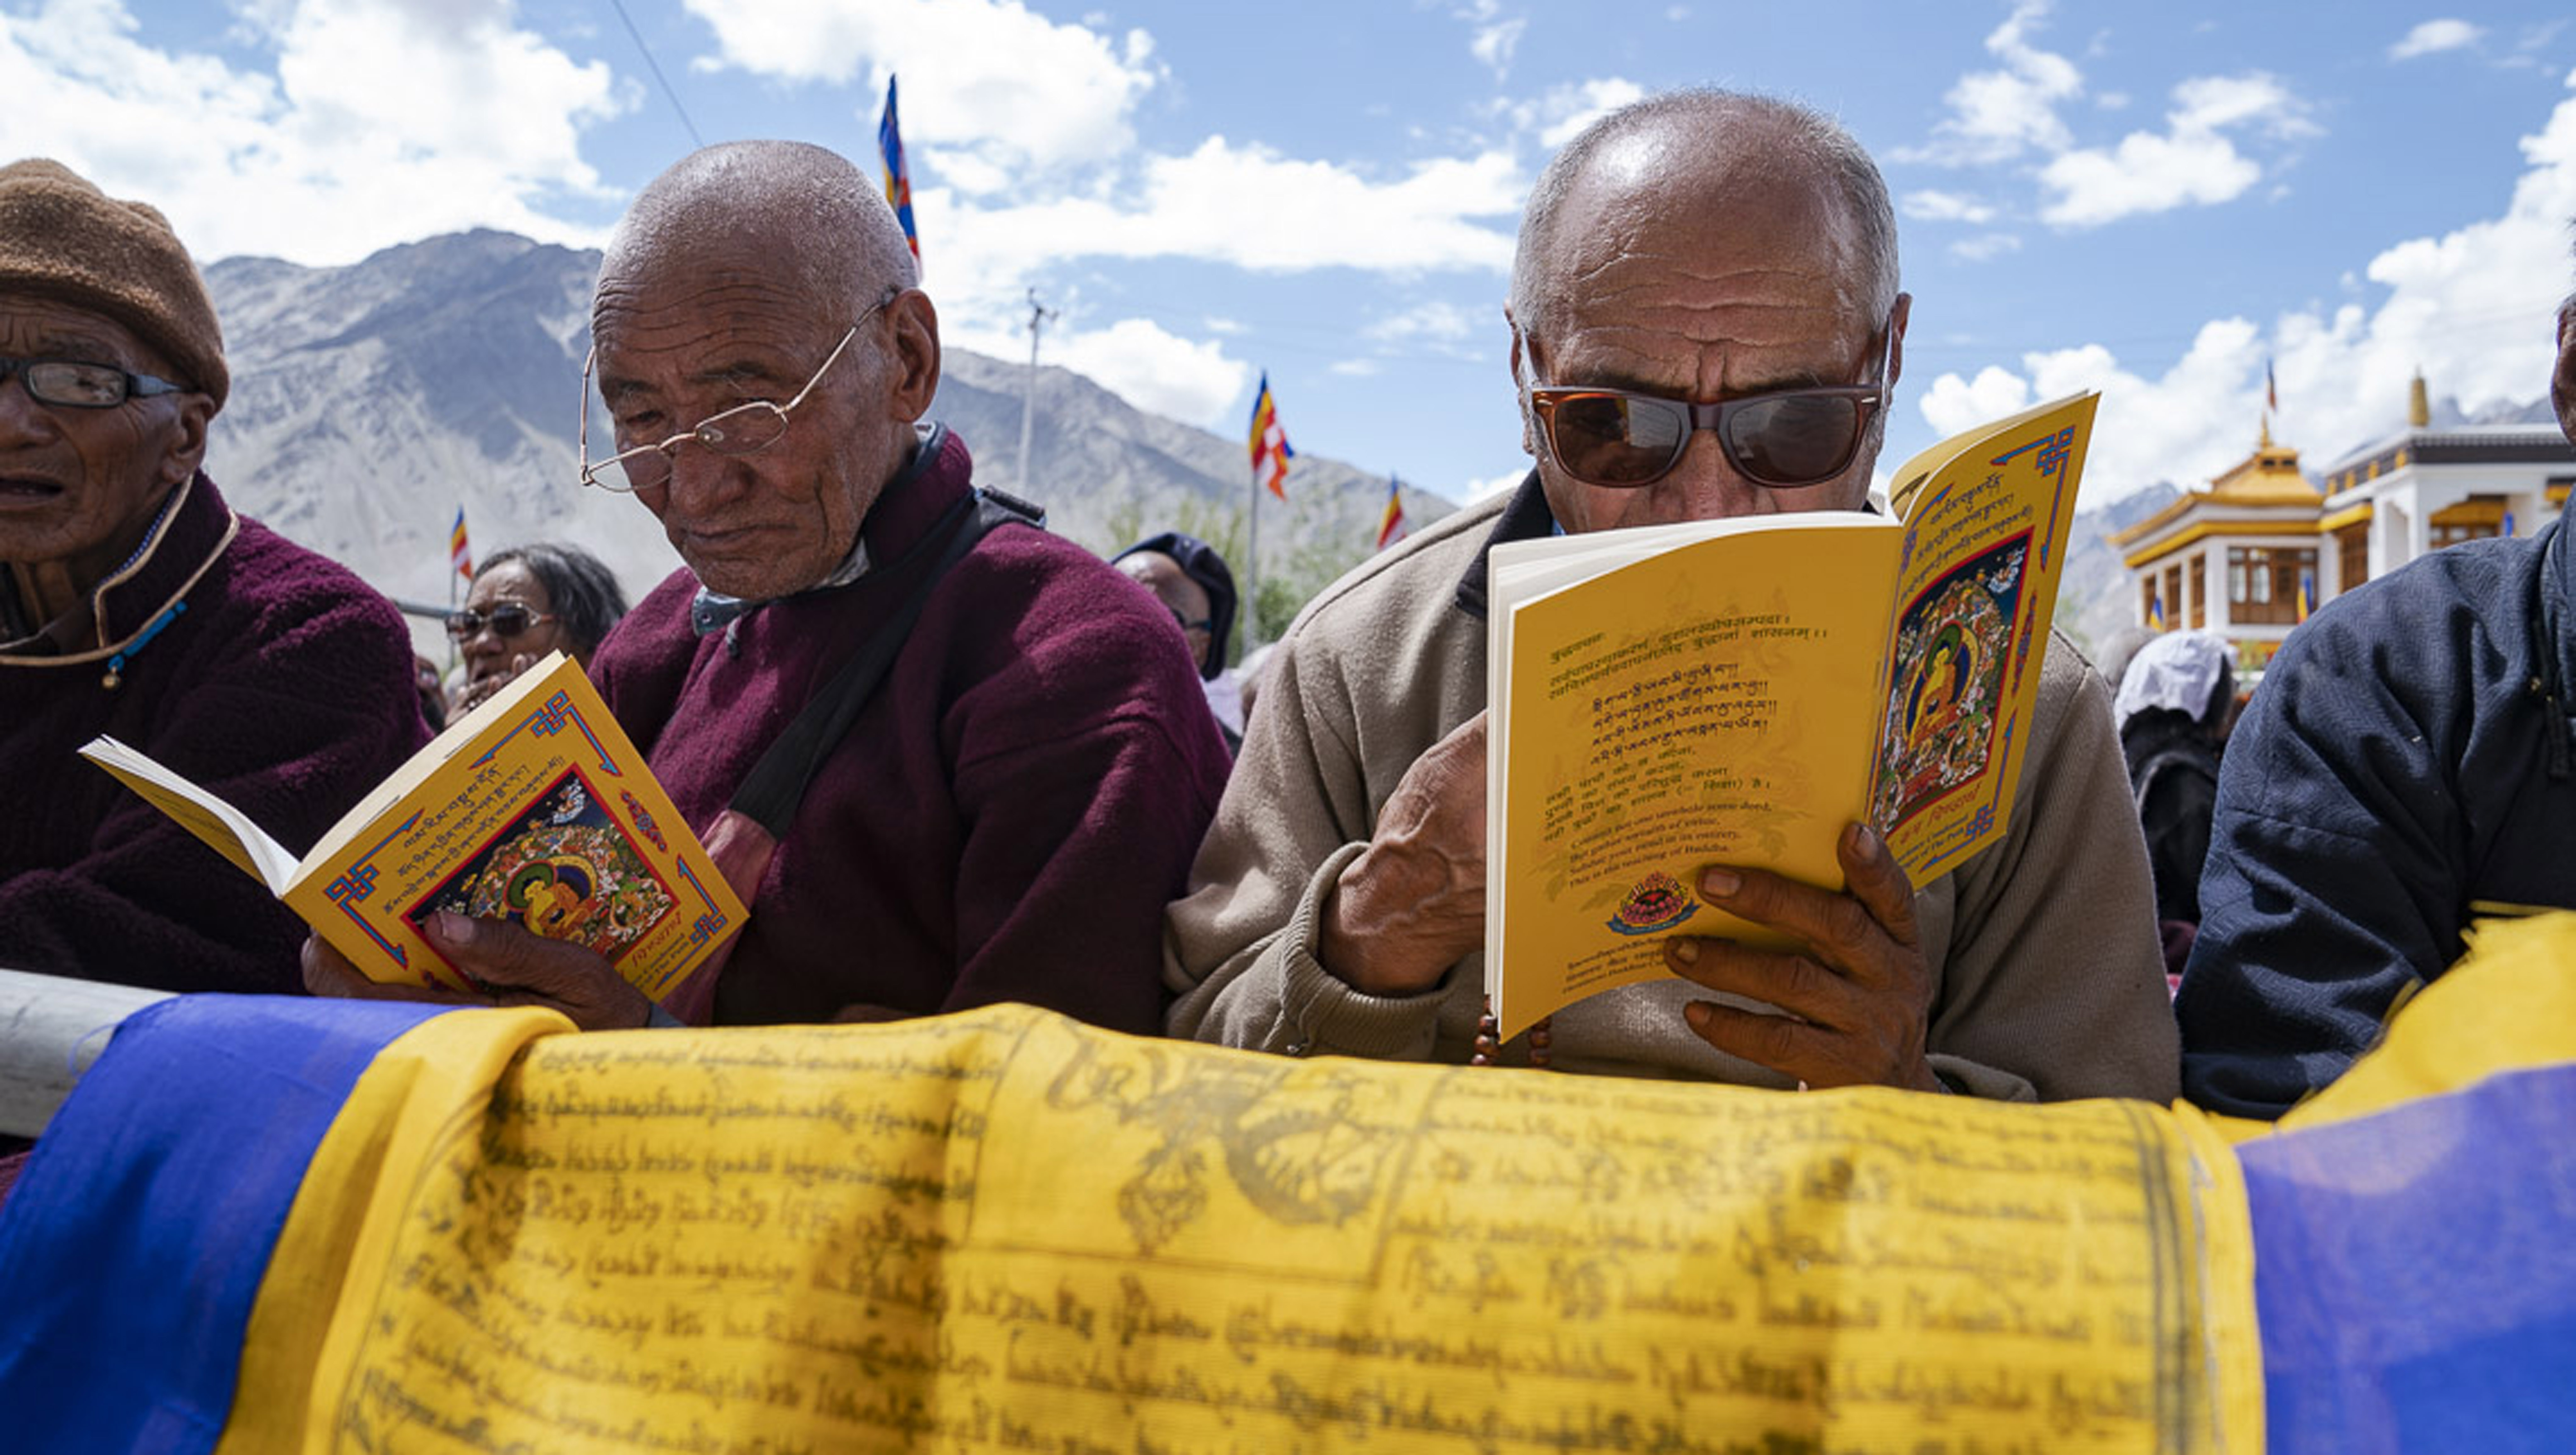 Members of the audience following the text during His Holiness the Dalai Lama's teaching in Padum, Zanskar, J&K, India on July 22, 2018. Photo by Tenzin Choejor